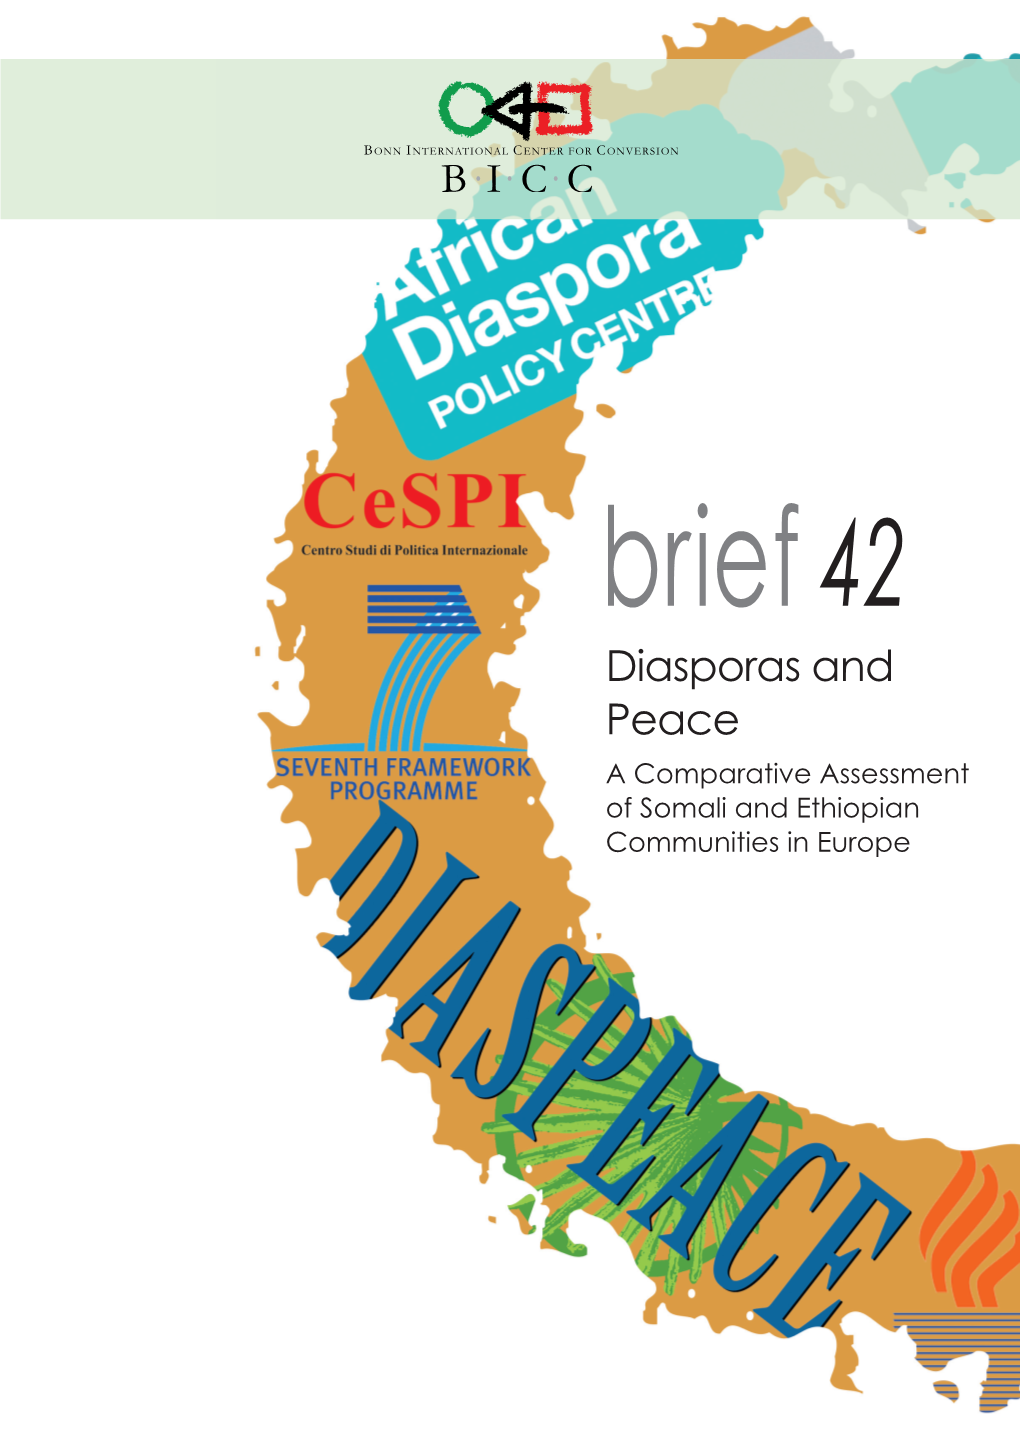 Diasporas and Peace a Comparative Assessment of Somali and Ethiopian Communities in Europe Contents